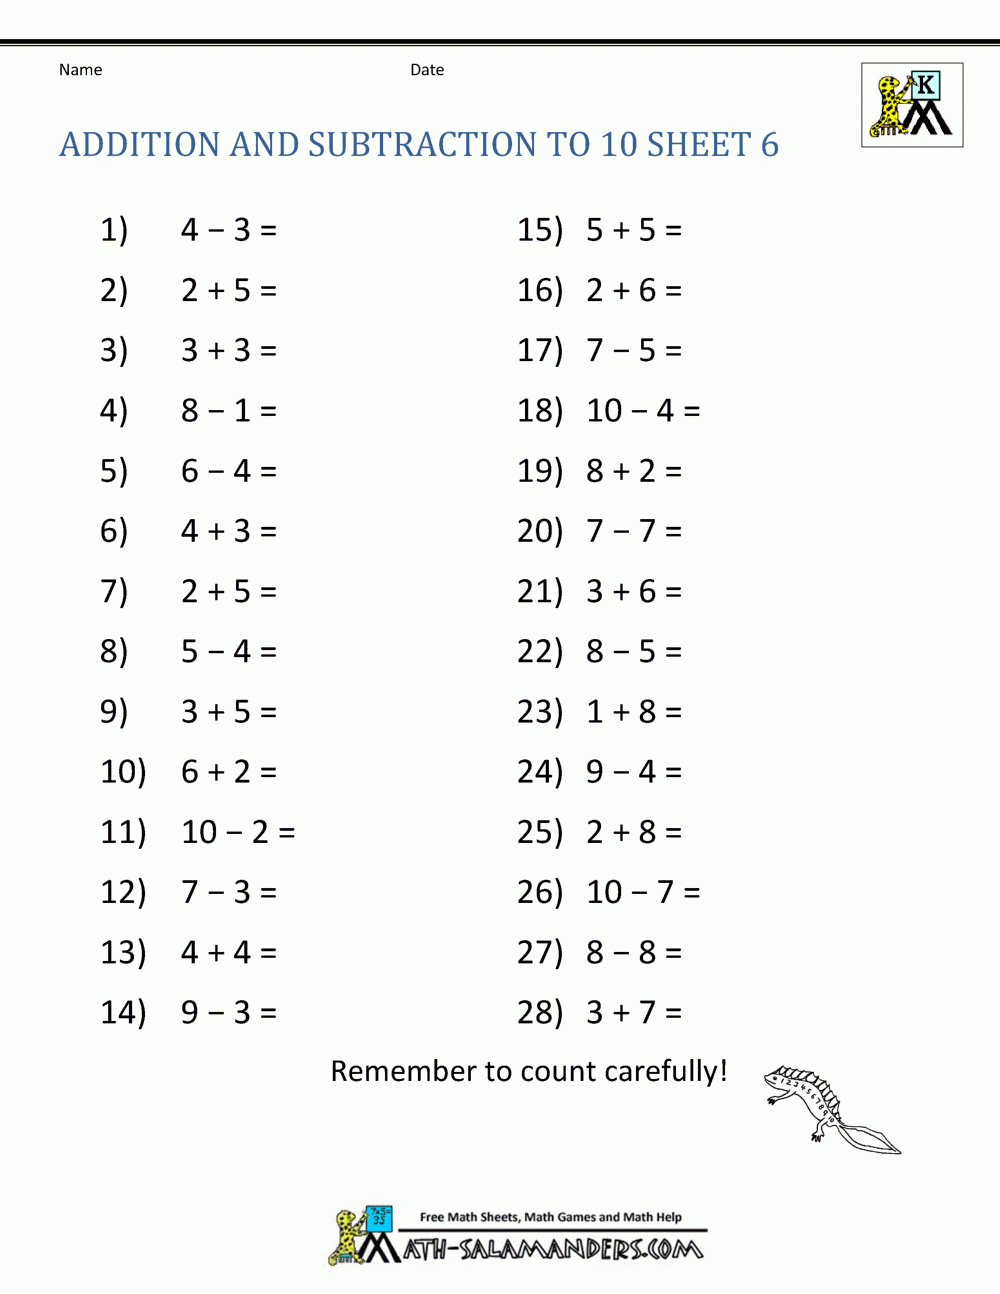 Addition And Subtraction Worksheets For Kindergarten - Free Printable Mixed Addition And Subtraction Worksheets